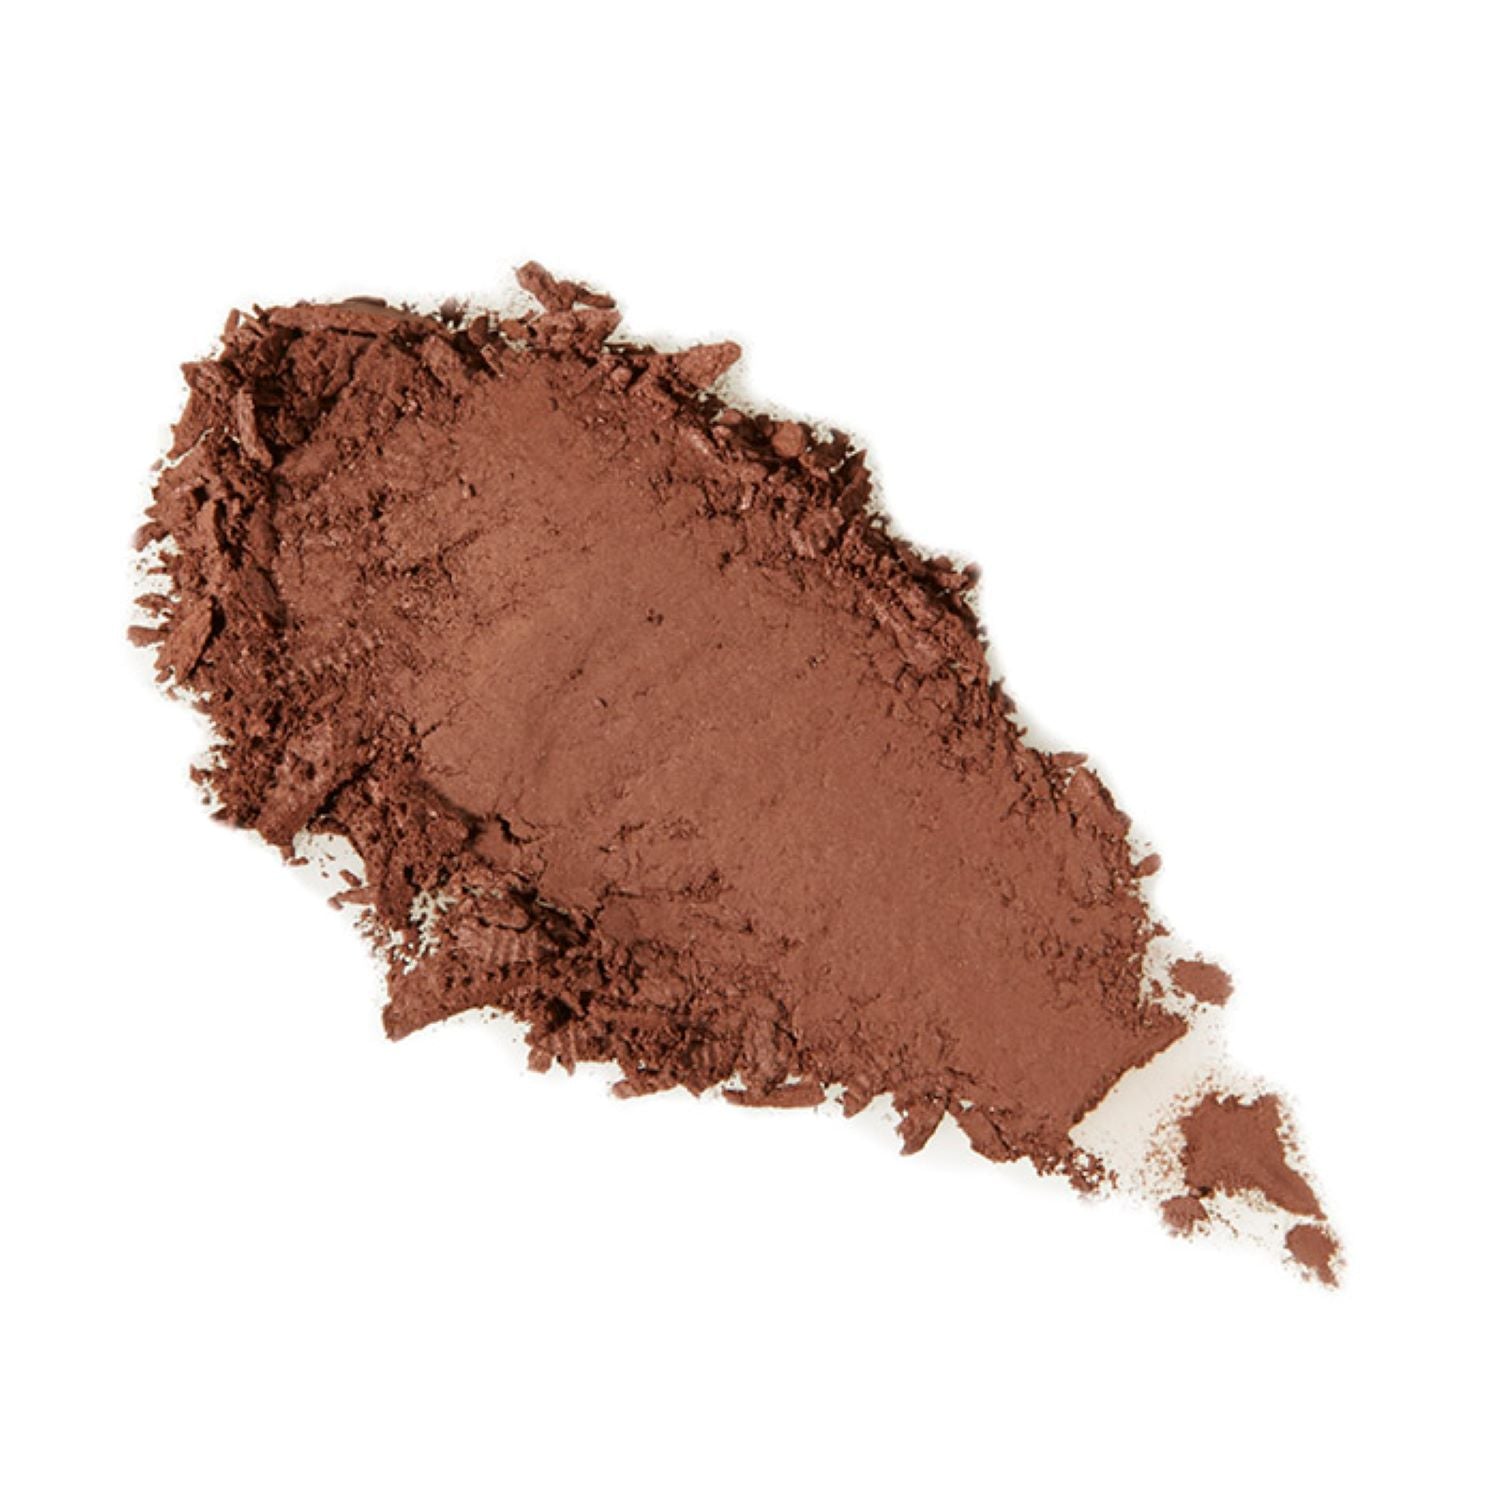 Youngblood Defining Bronzer / TRUFFLE